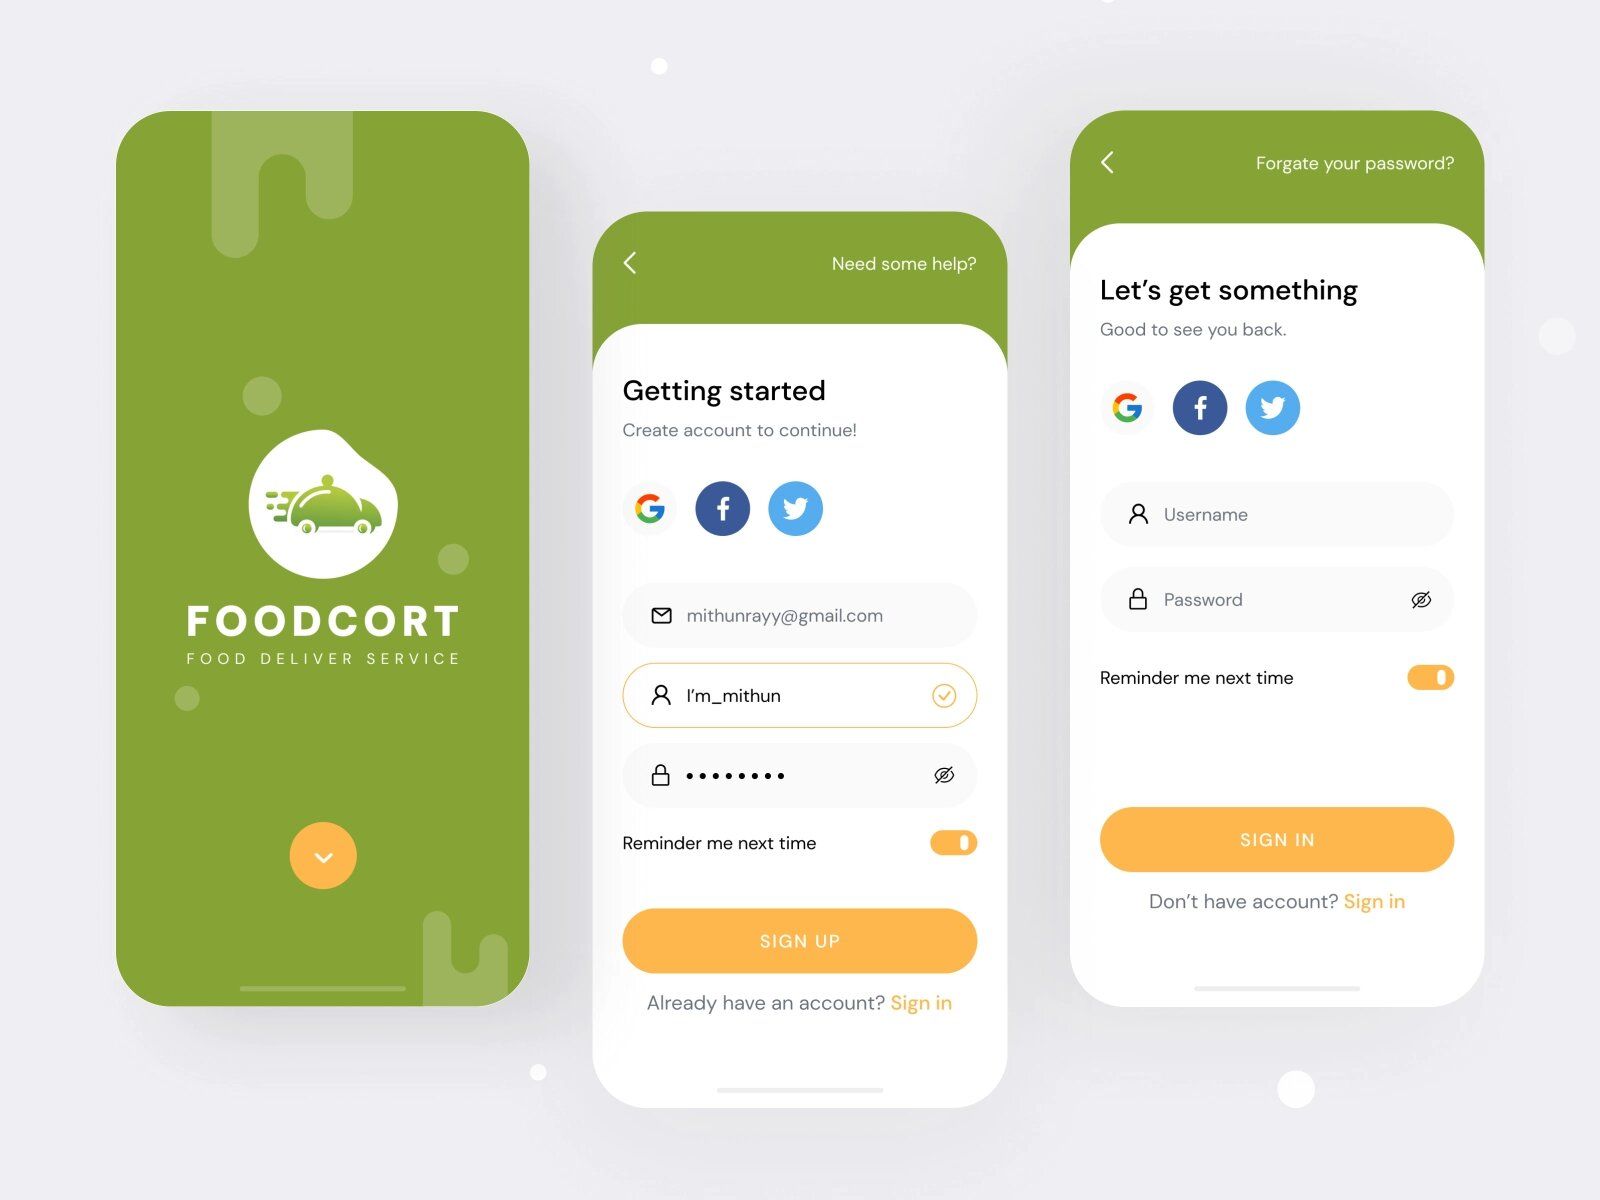 To create a food ordering app, you should include signing up features and personal profile (*image by [Mithun 🔥](https://dribbble.com/mithunray){ rel="nofollow" target="_blank" .default-md}*)